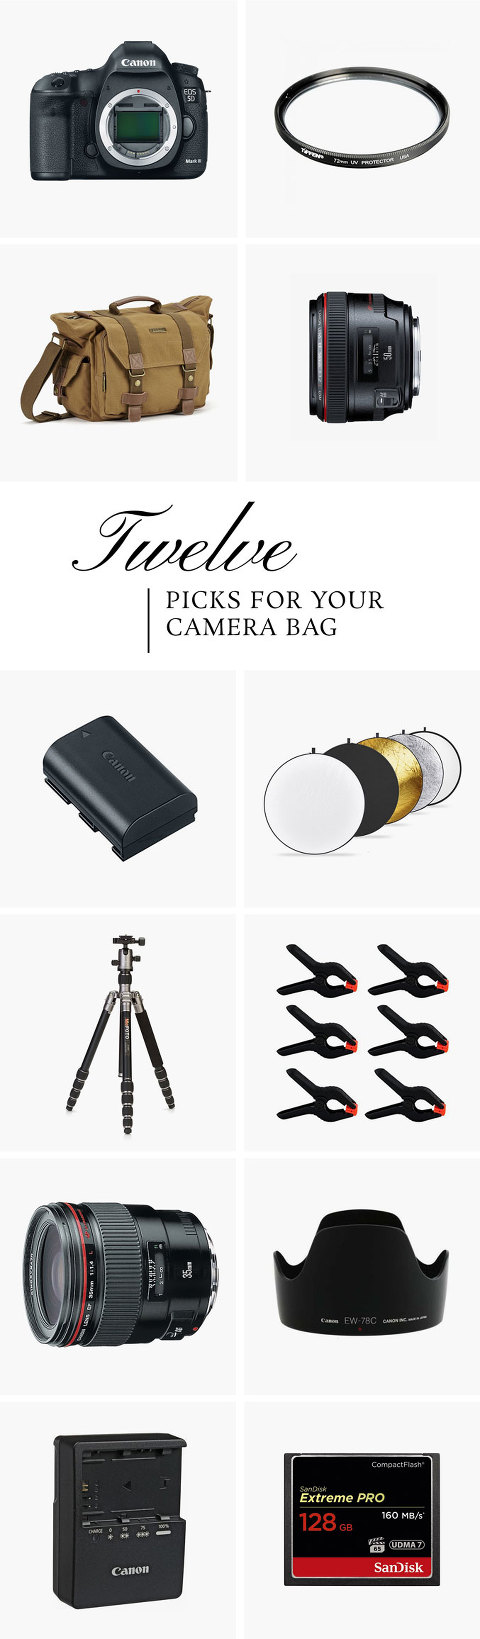 Everything You Need To Fill Your Pro Camera Bag | dreamgreendiy.com